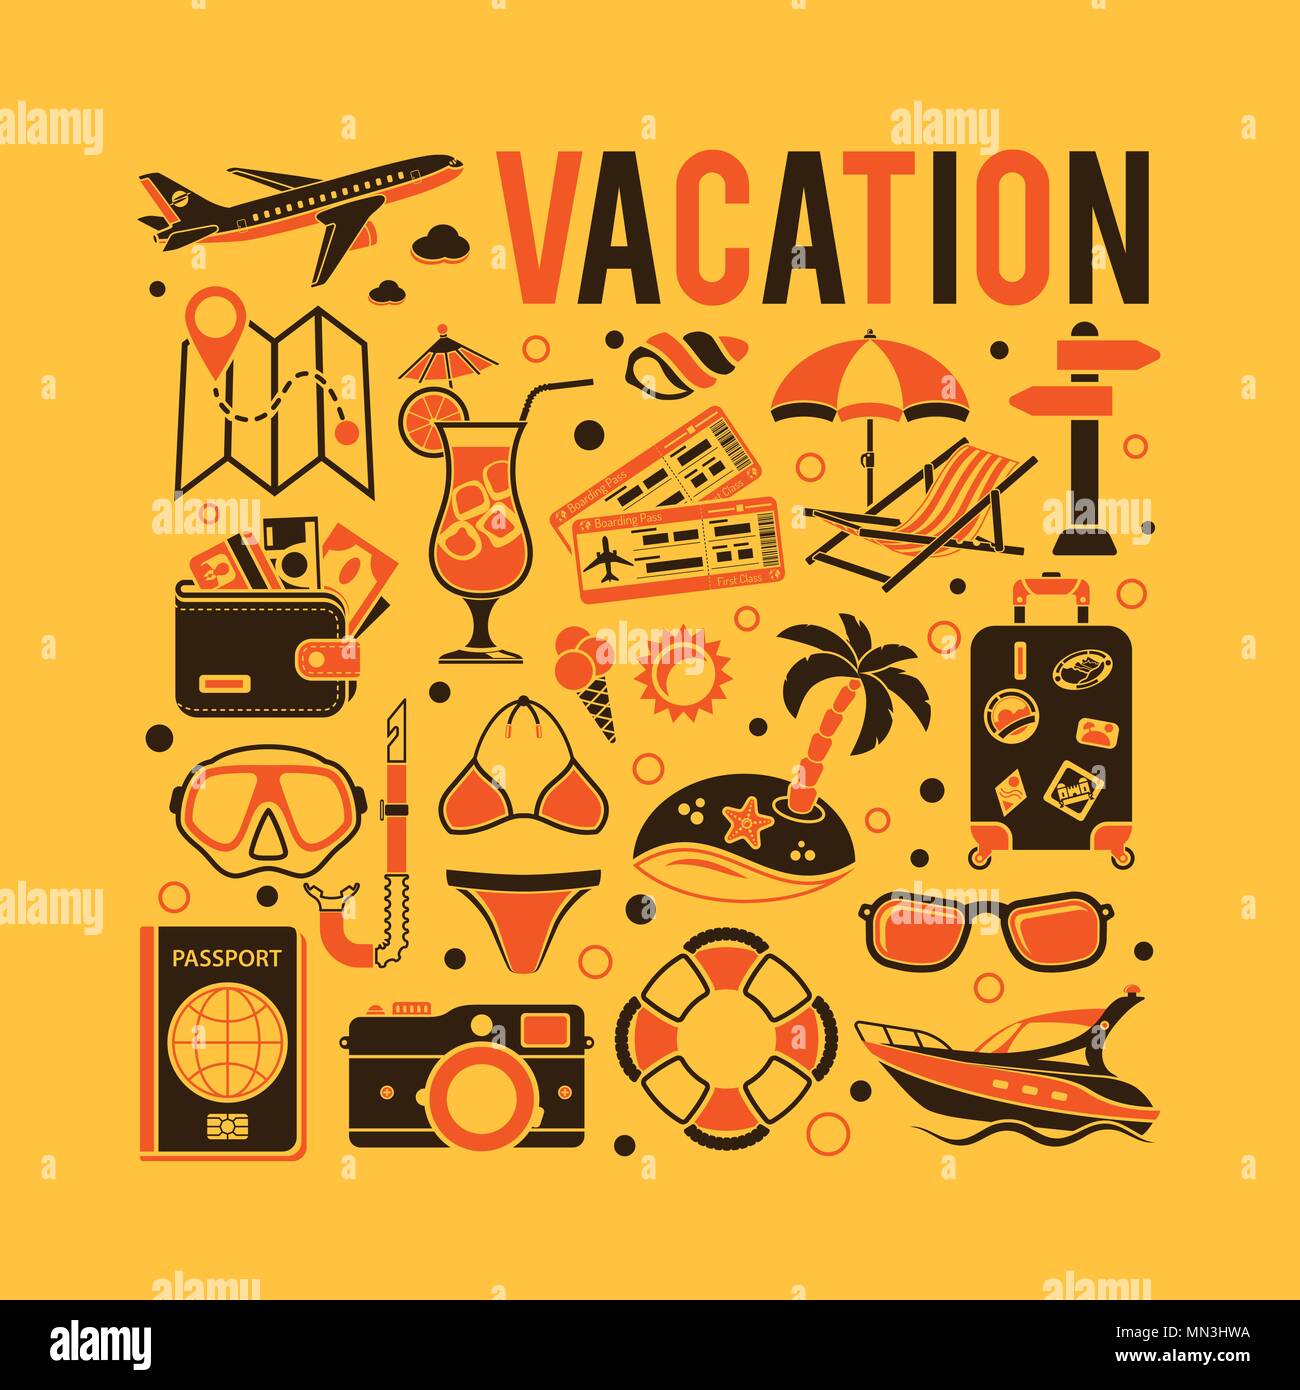 Vacation and Tourism Concept Stock Vector